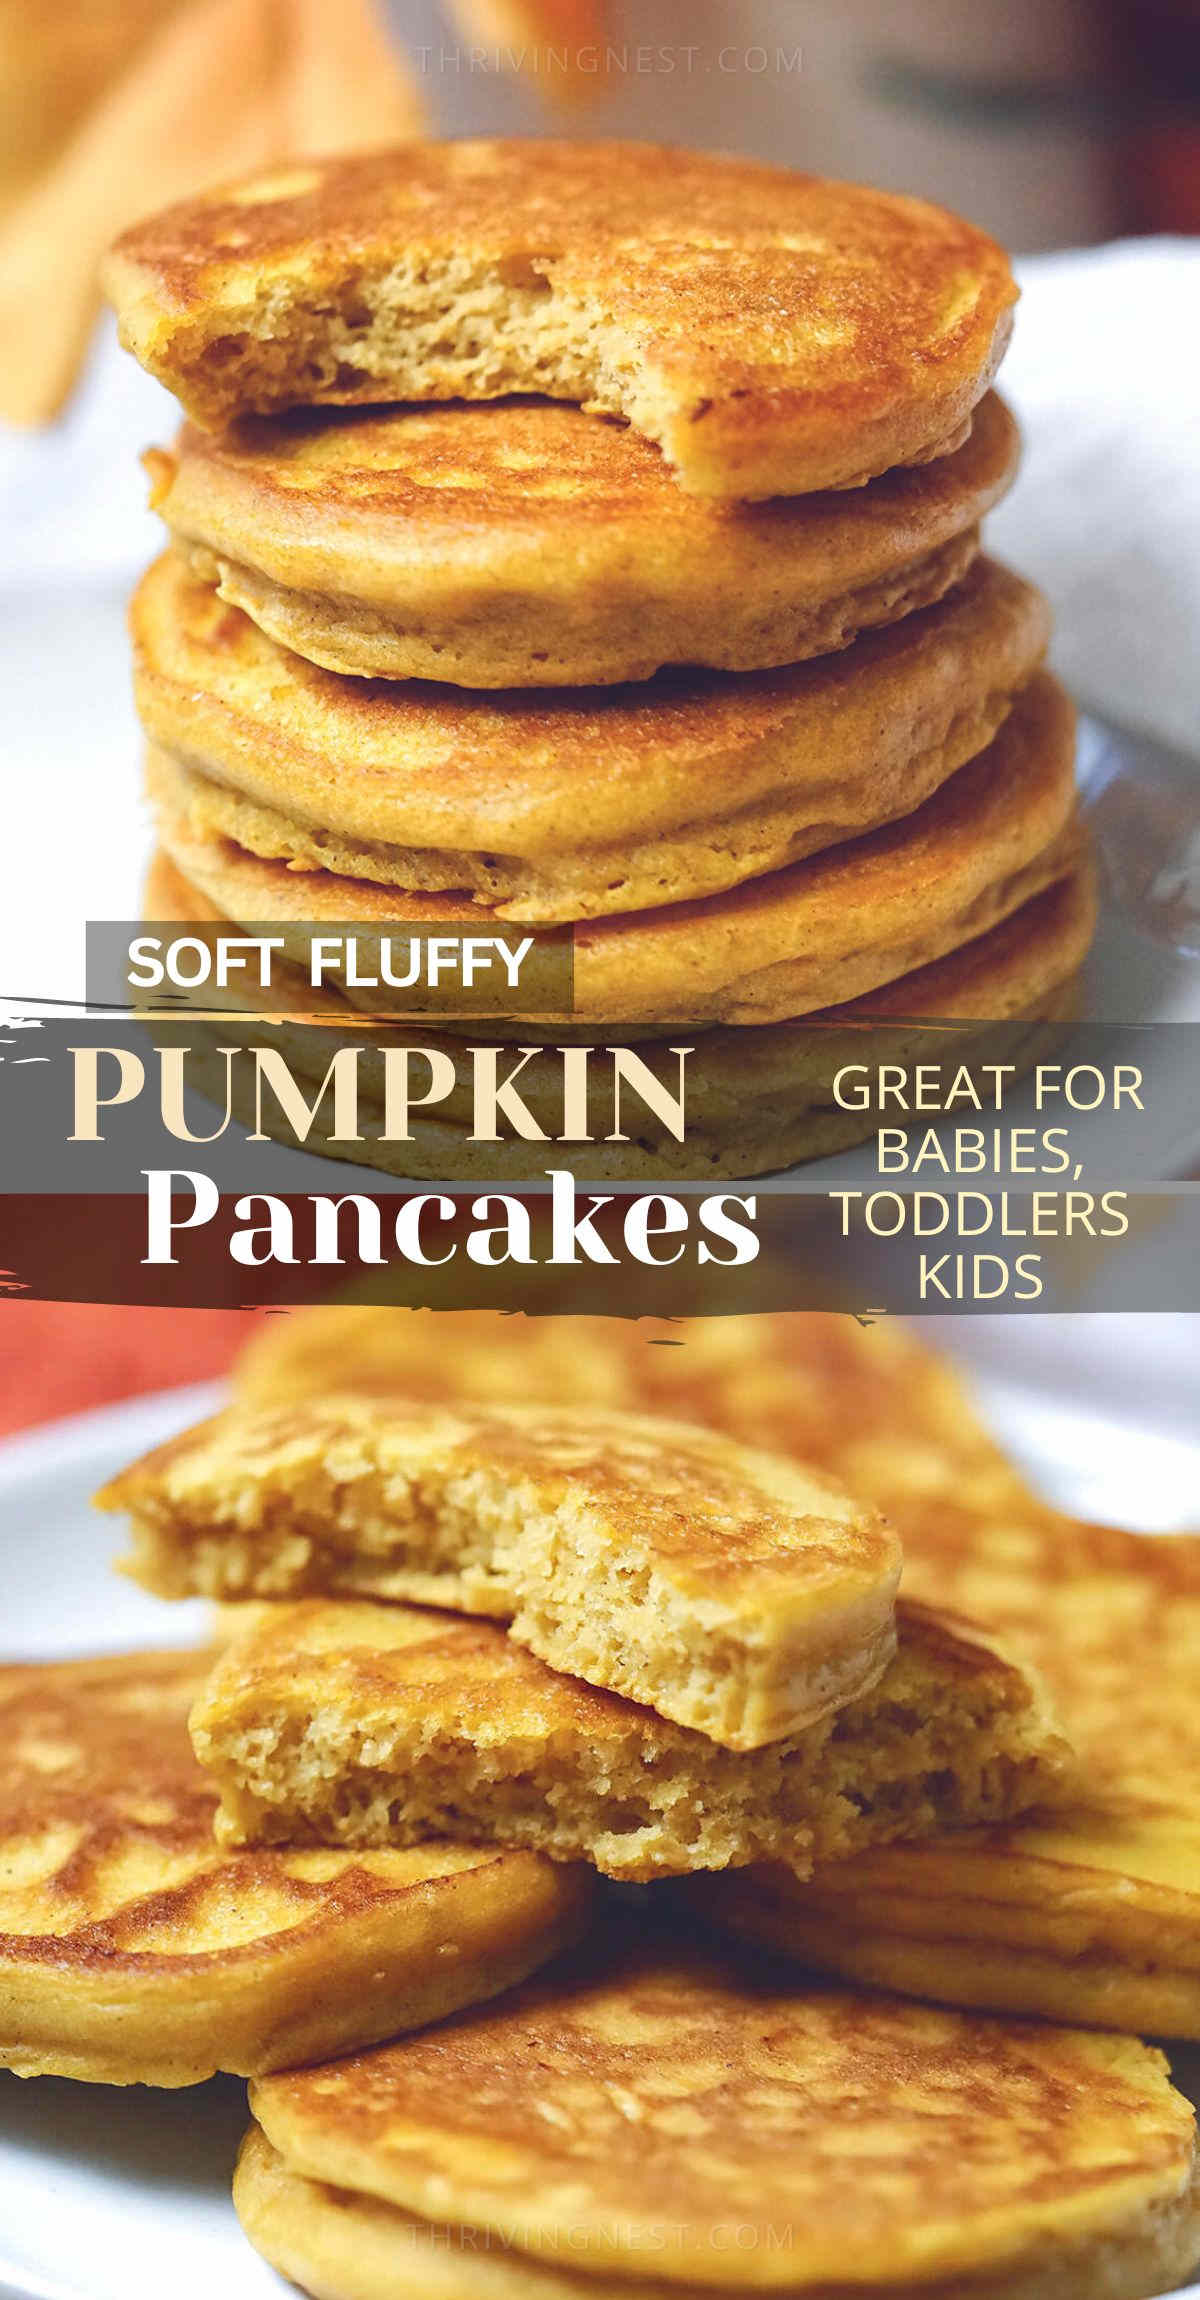 Pumpkin pancakes – fluffy soft healthy pumpkin pancakes great for baby (blw), toddler, older kids and entire family. These pumpkin pancakes are made with pumpkin puree, naturally dairy free and can be easily customized to be gluten free. Serve for breakfast or as a snack, great for lunchbox too. #pumpkin #pancakes #baby #blw #kids #breakfast #toddler